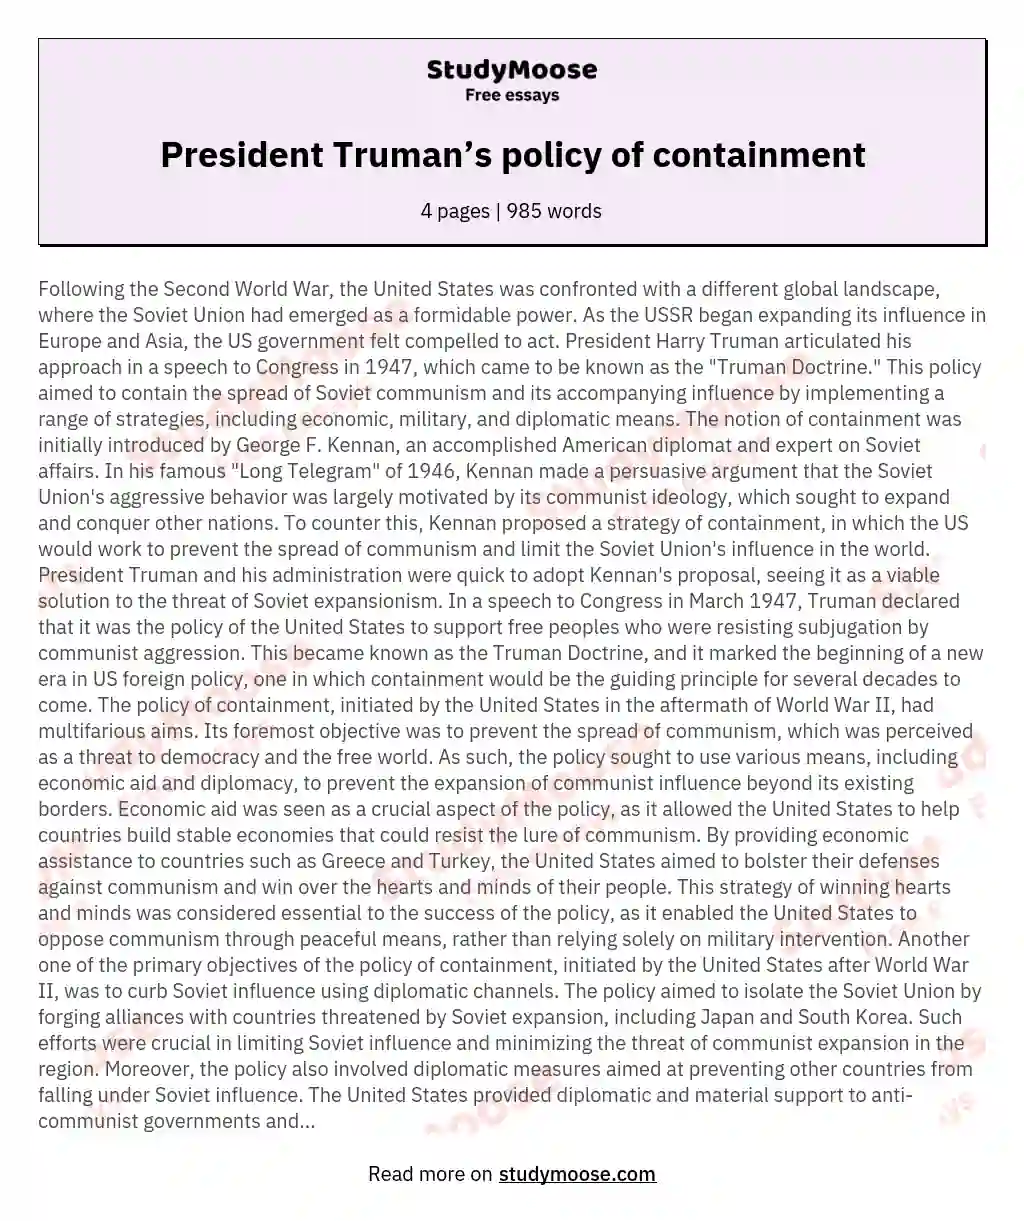 President Truman’s policy of containment essay